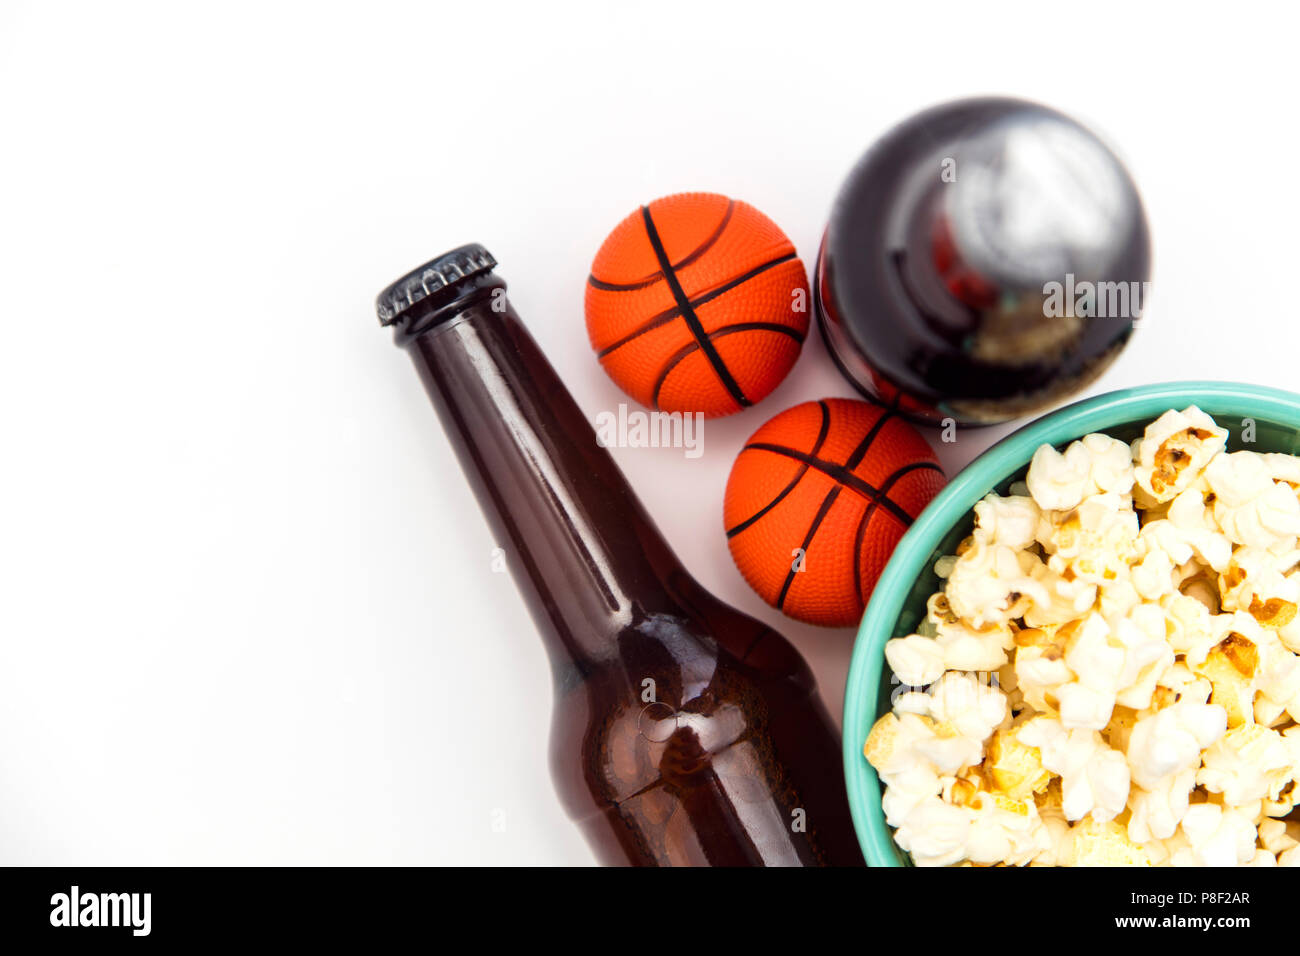 Baasketball match party. Beer bottle with basketball and popcorn Stock Photo